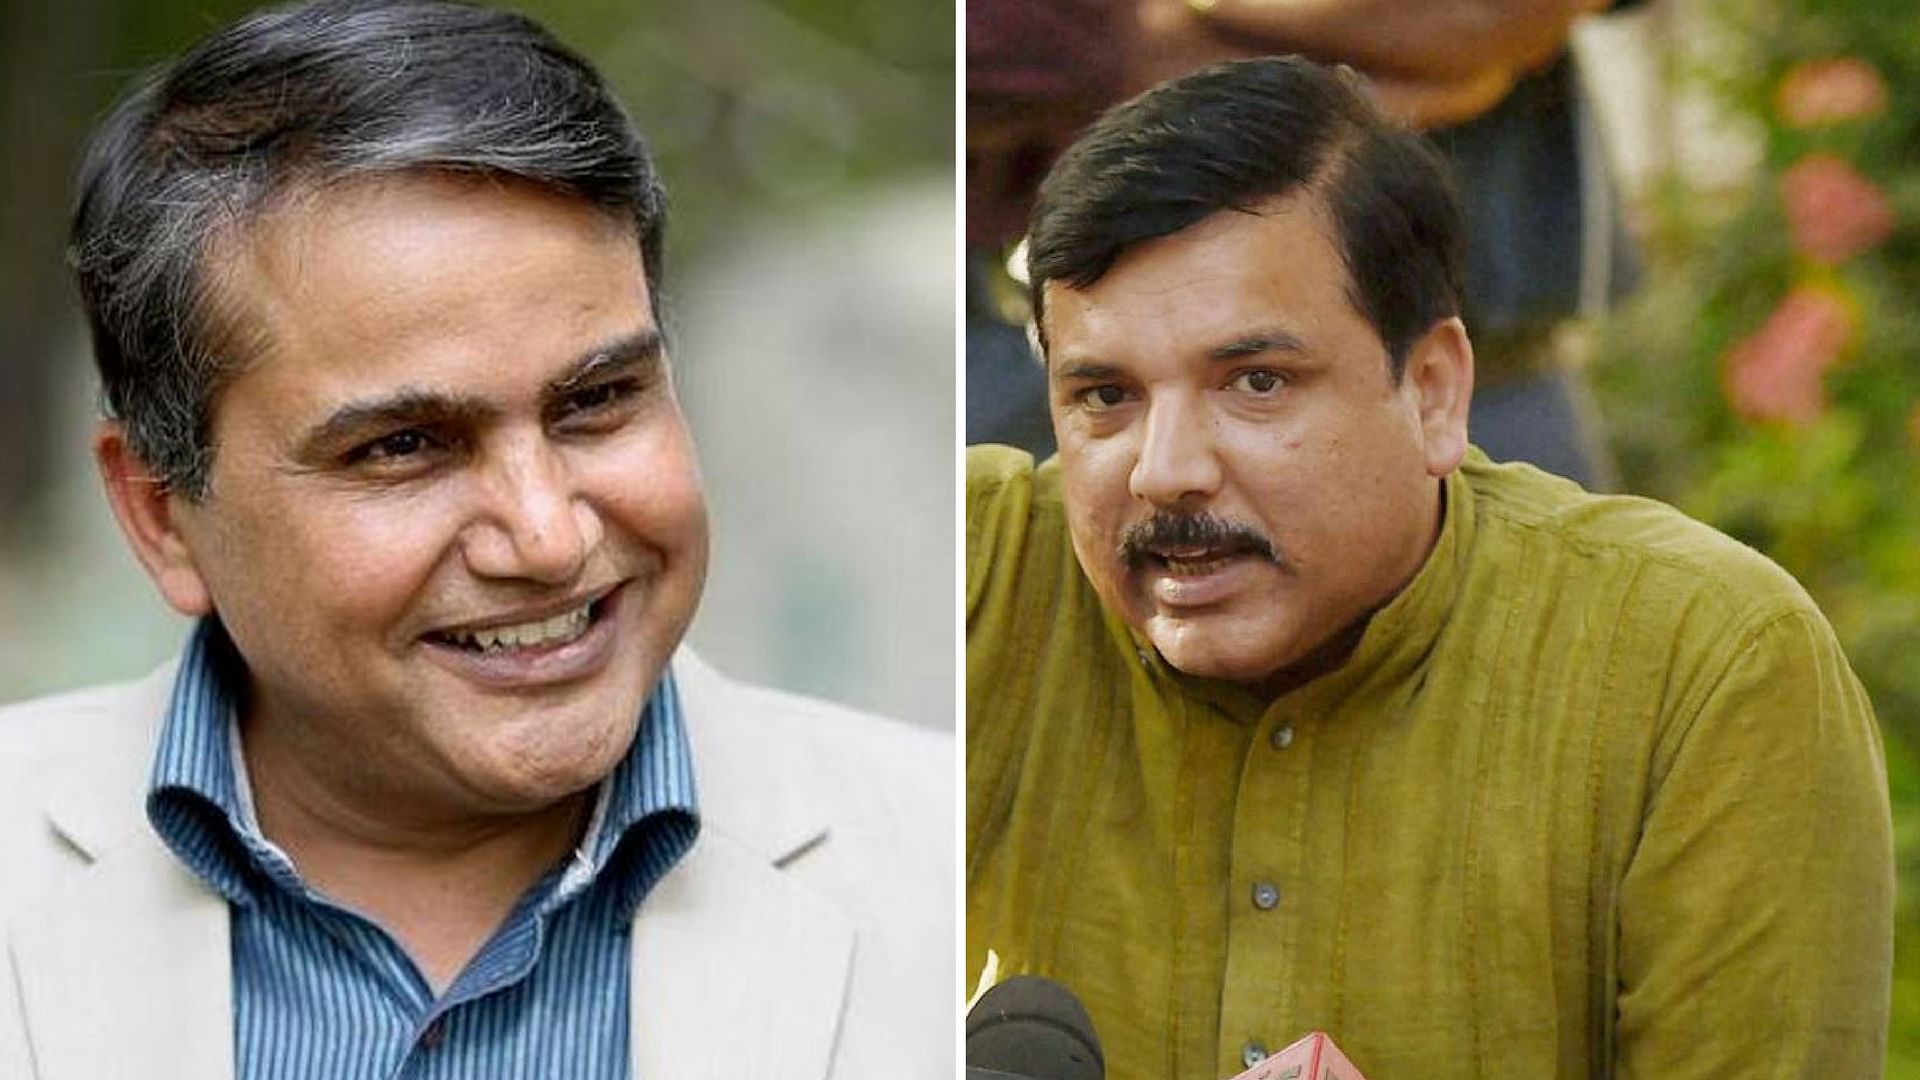 Sanjay Singh and Devinder Sehrawat have been at loggerheads for a while now. (Photo: <b>The Quint</b>)